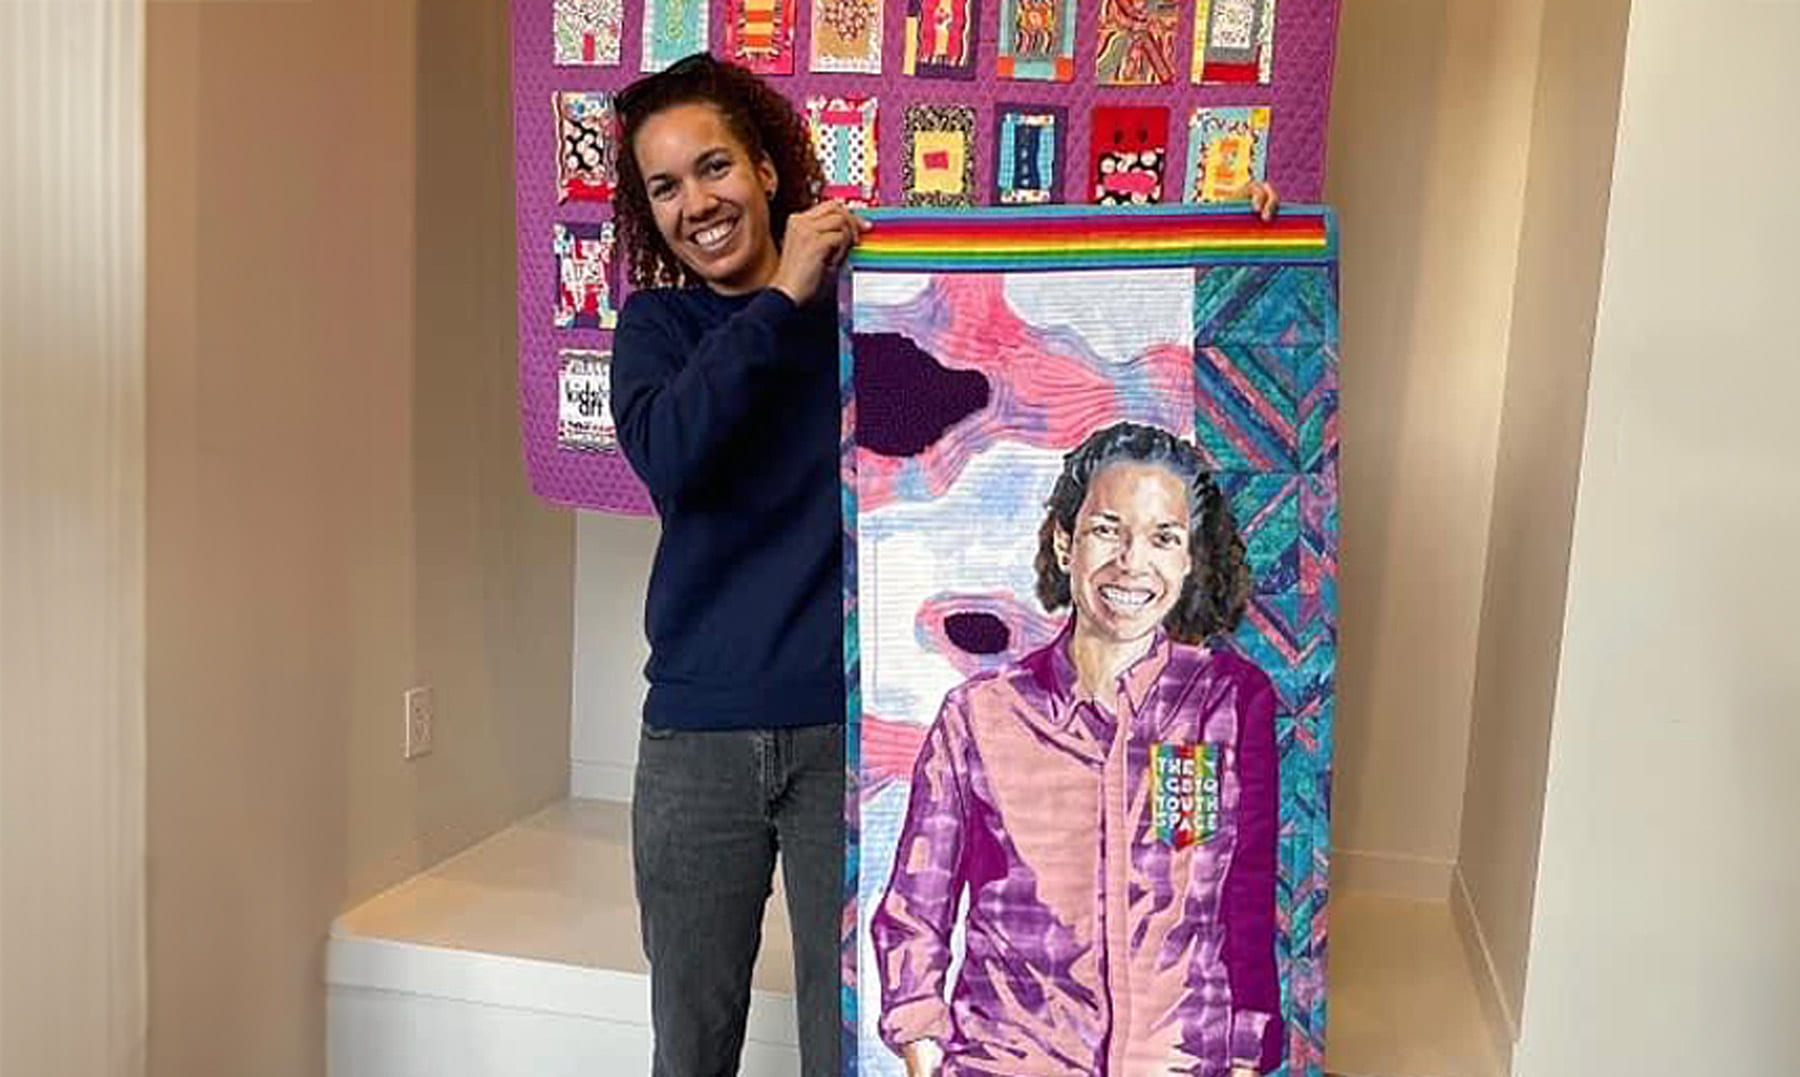 Alumna Adrienne Keel stands smiling with a self portrait made of fabric.